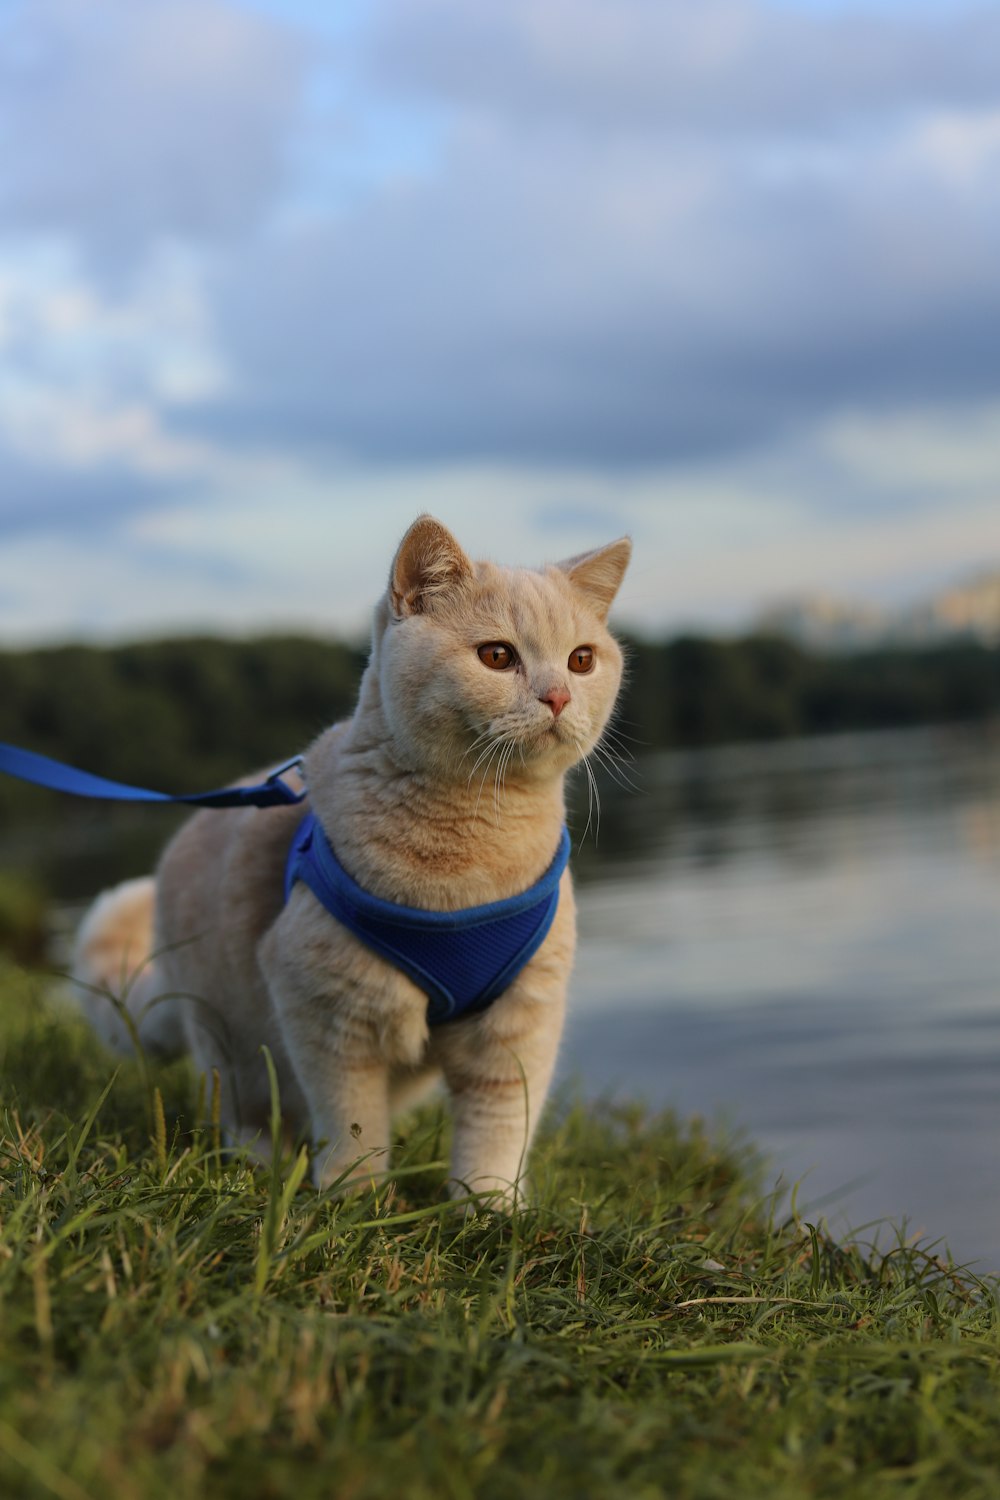 a cat with a leash walking on grass by water